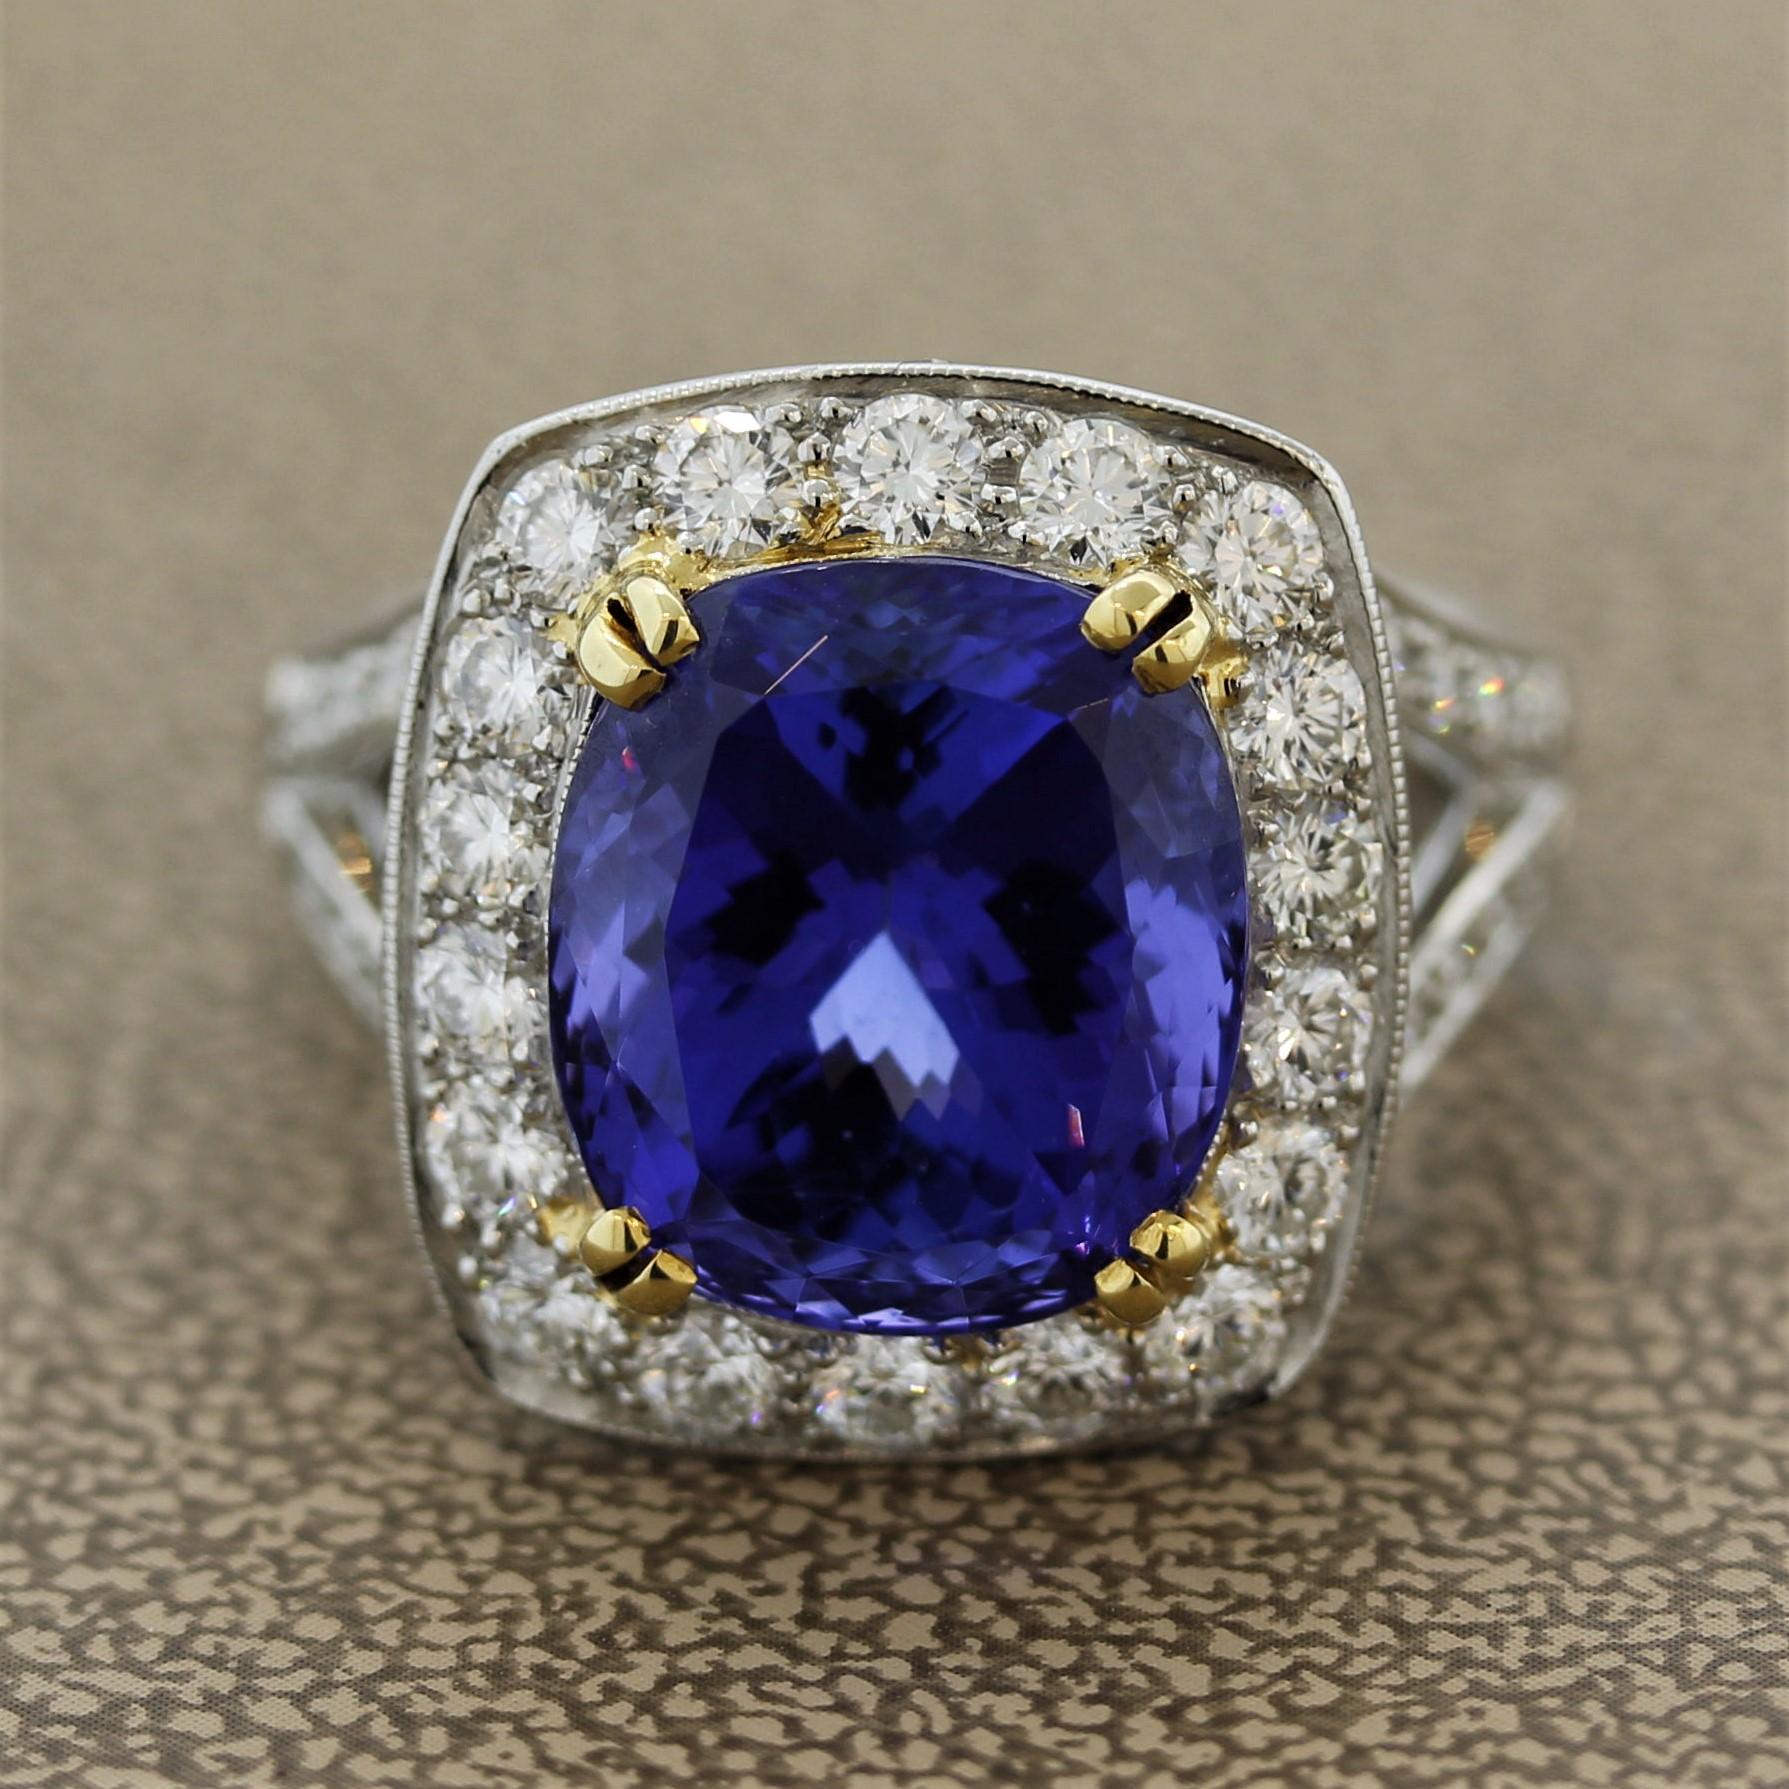 A finely made ring featuring a gem quality cushion shaped tanzanite weighing 8.79 carats. It has a rich blue color with bright flashes of purple. It is accented by 1.62 carats of round brilliant cut diamonds set in a hand fabricated platinum